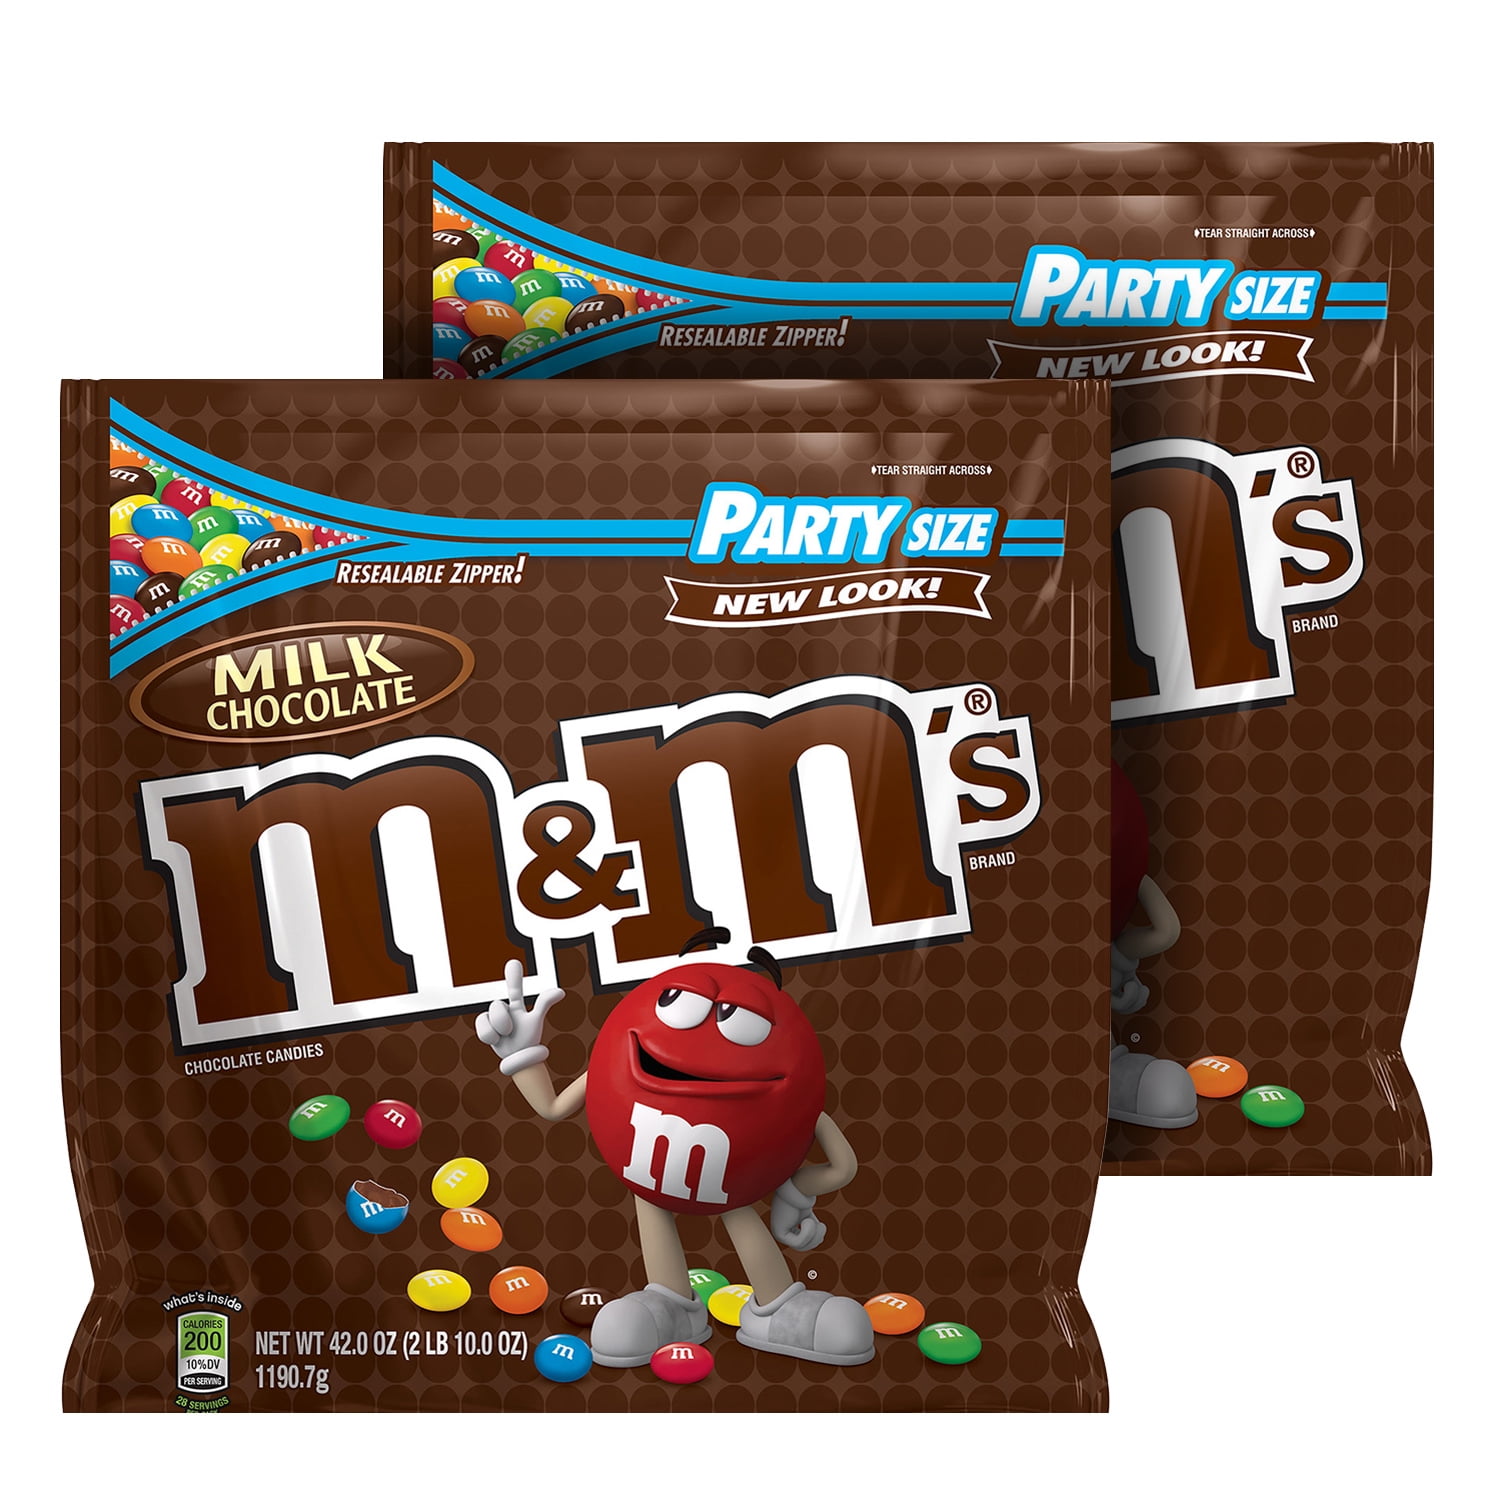 M&m's Milk Chocolate Party Share Bag 11 Pieces 148g